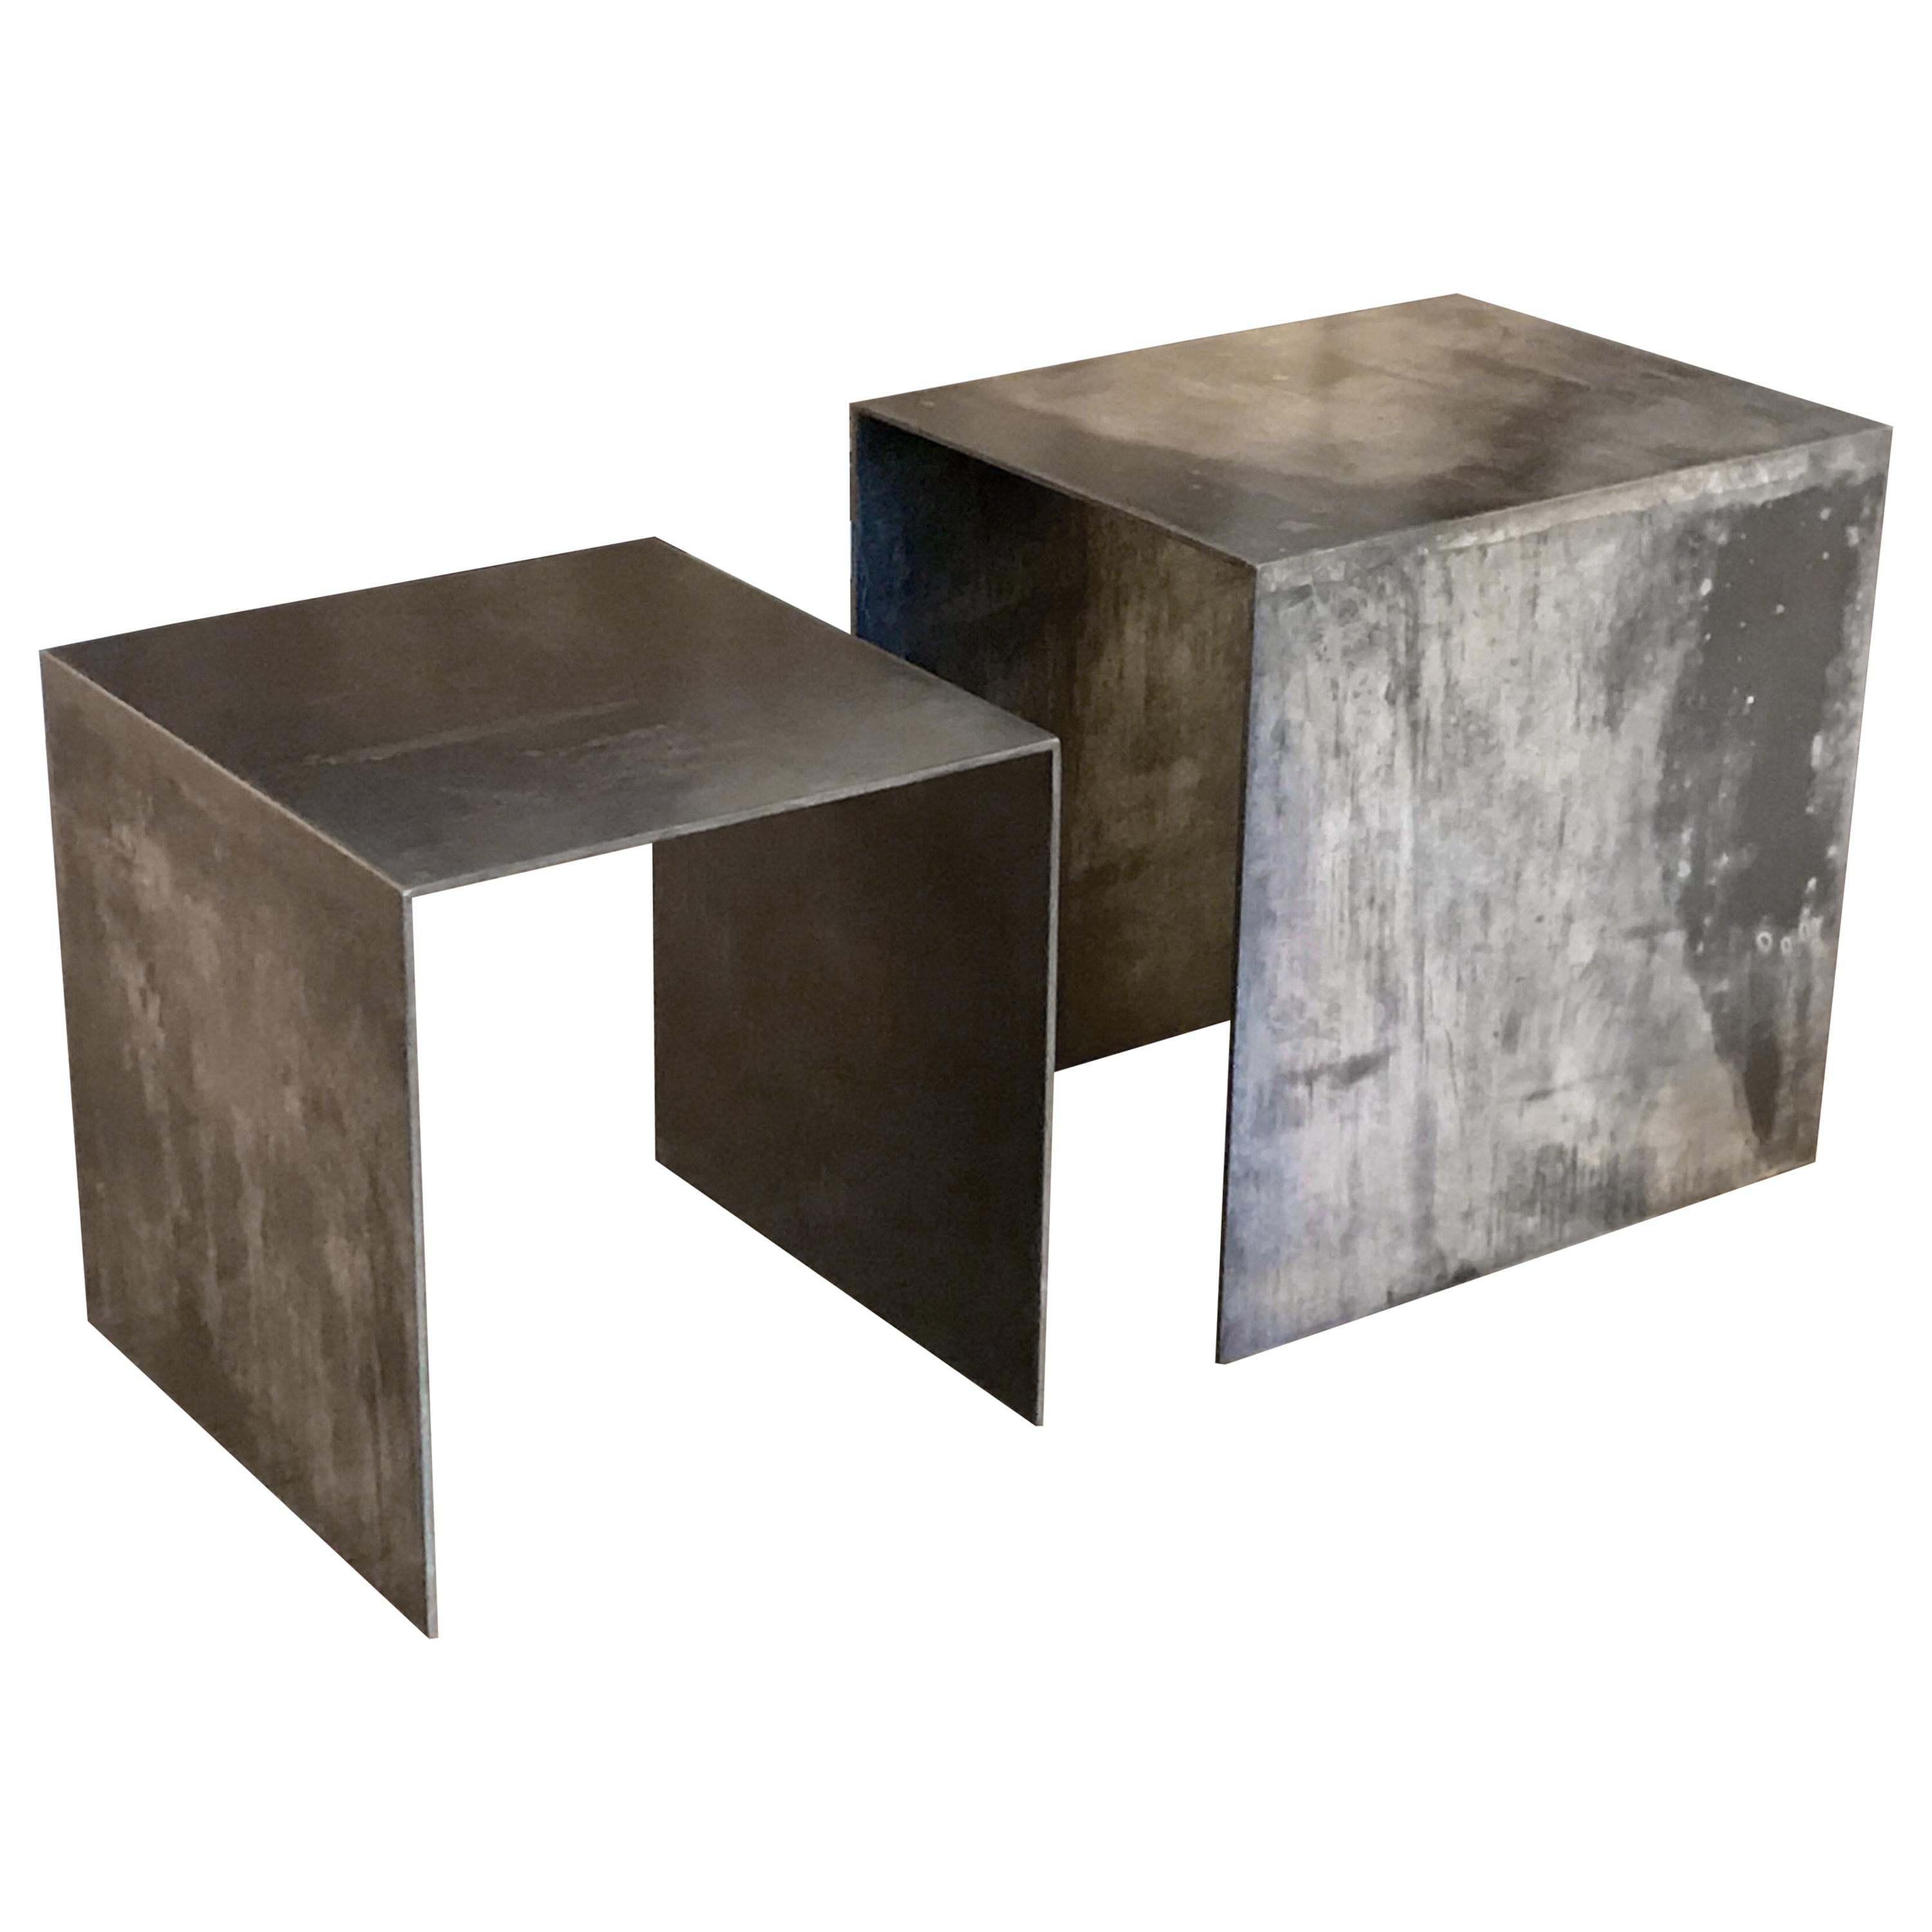 Architectural Steel Tables